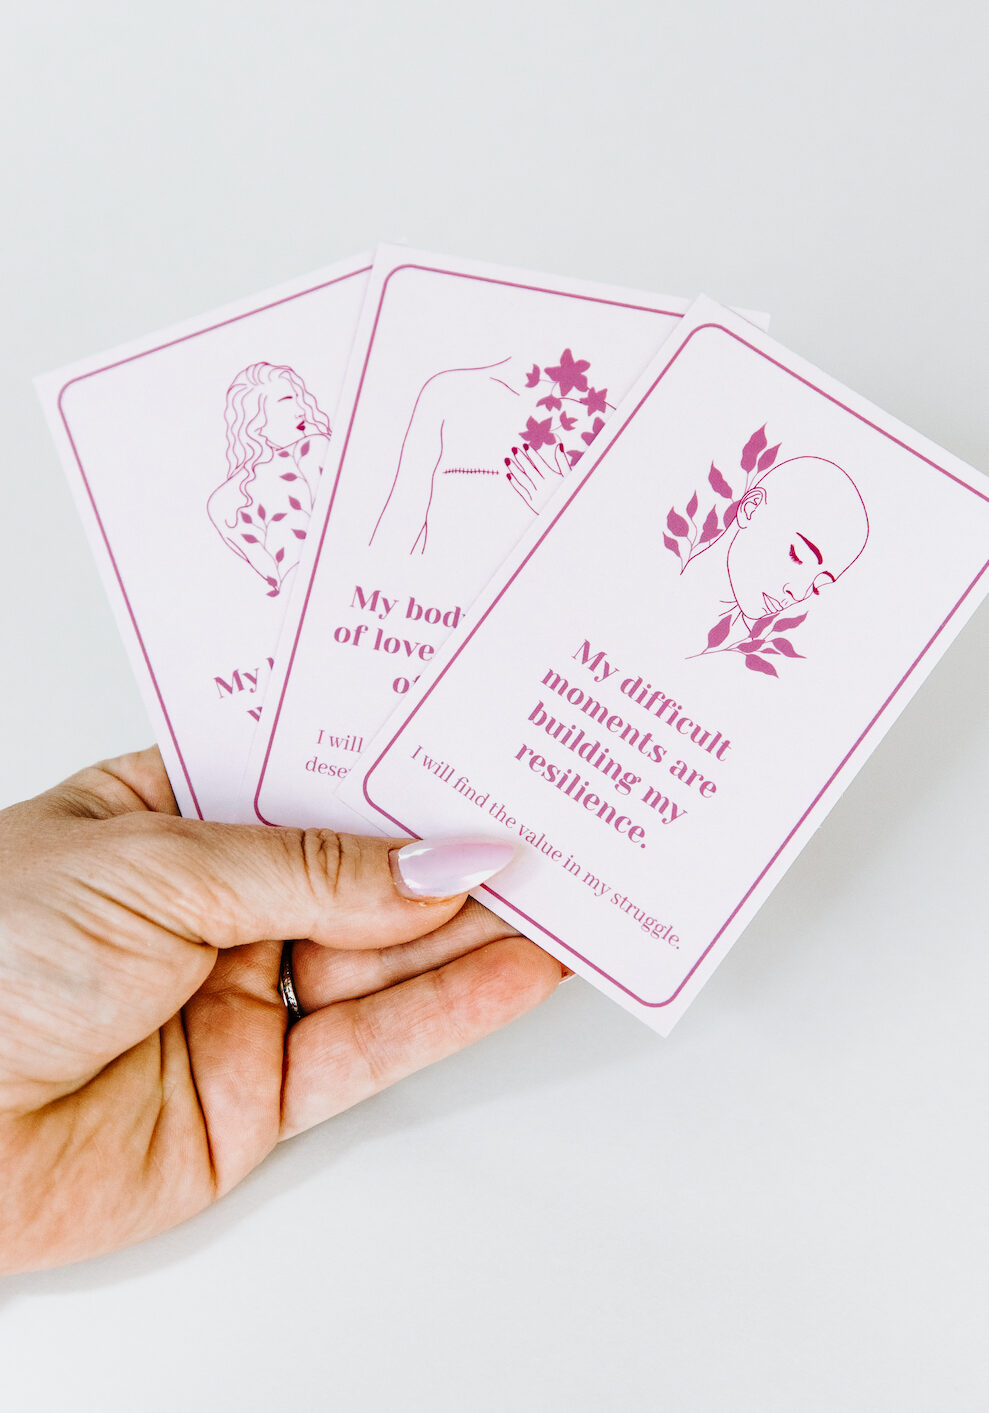 holding 3 affirmation cards with breast cancer scars